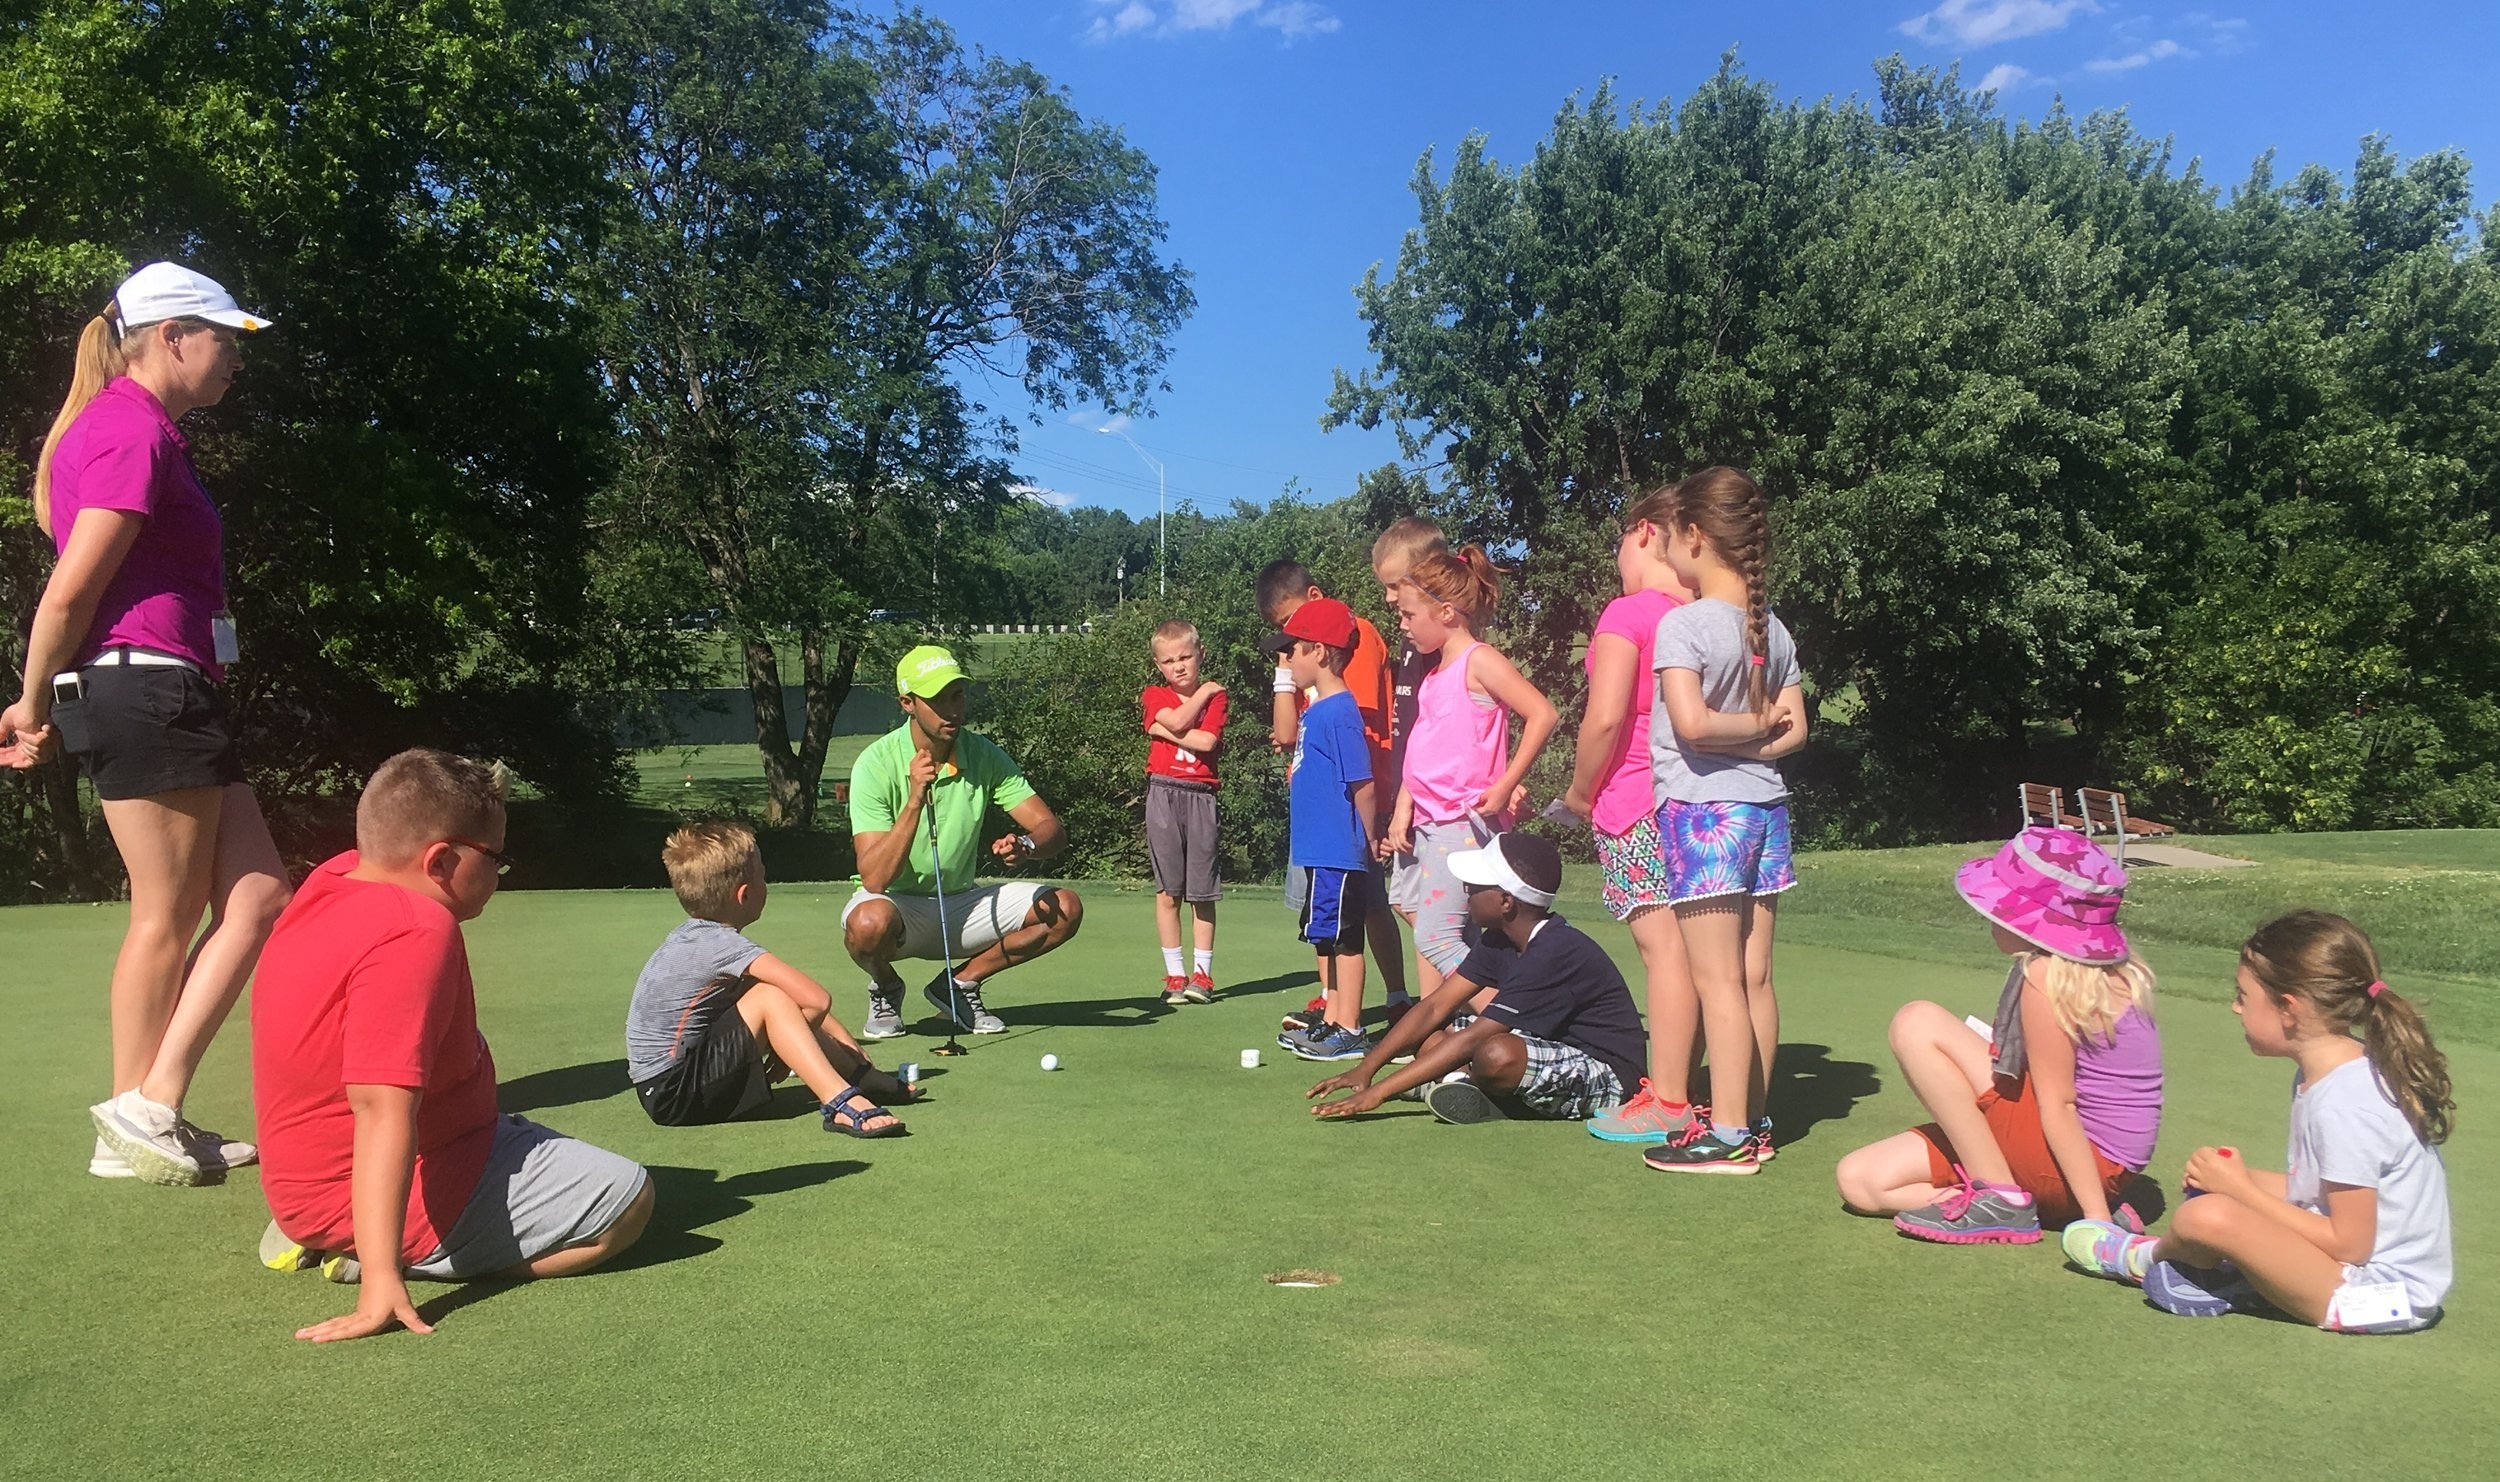 A group of young kids learning about golf.